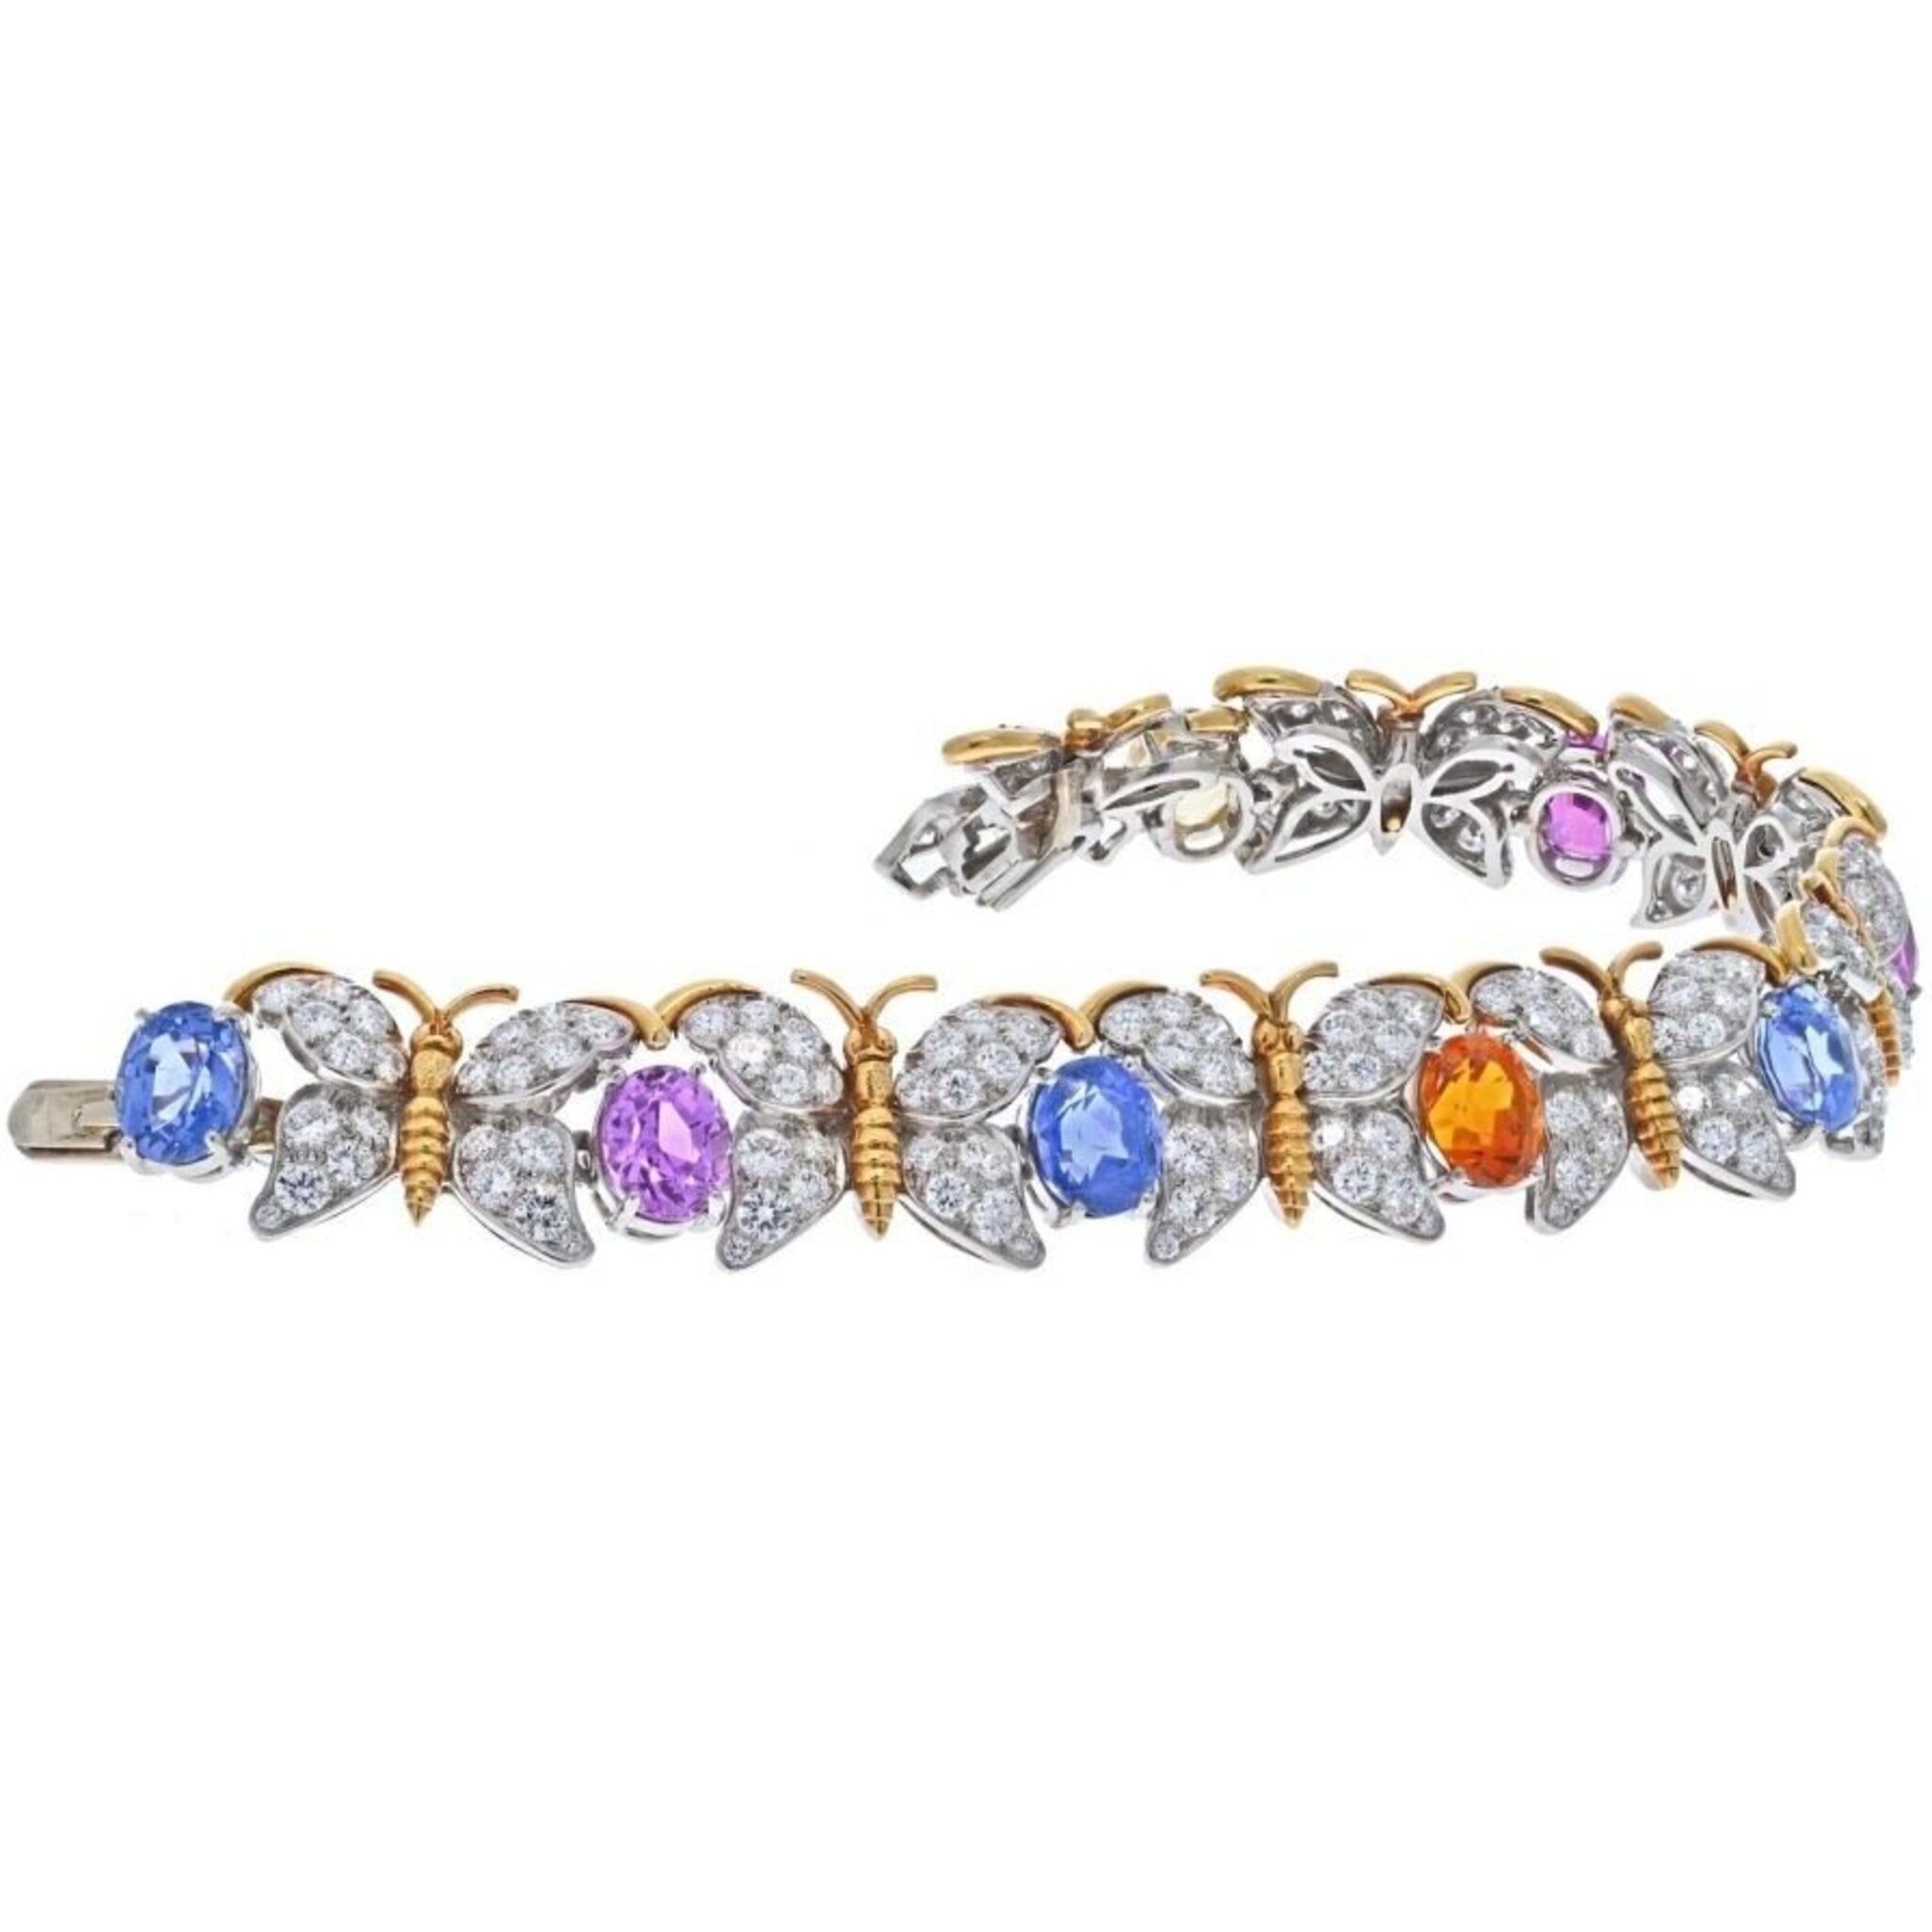 Tiffany Victoria® Tennis Bracelet in Platinum with Diamonds and Pearls|  Tiffany & Co.